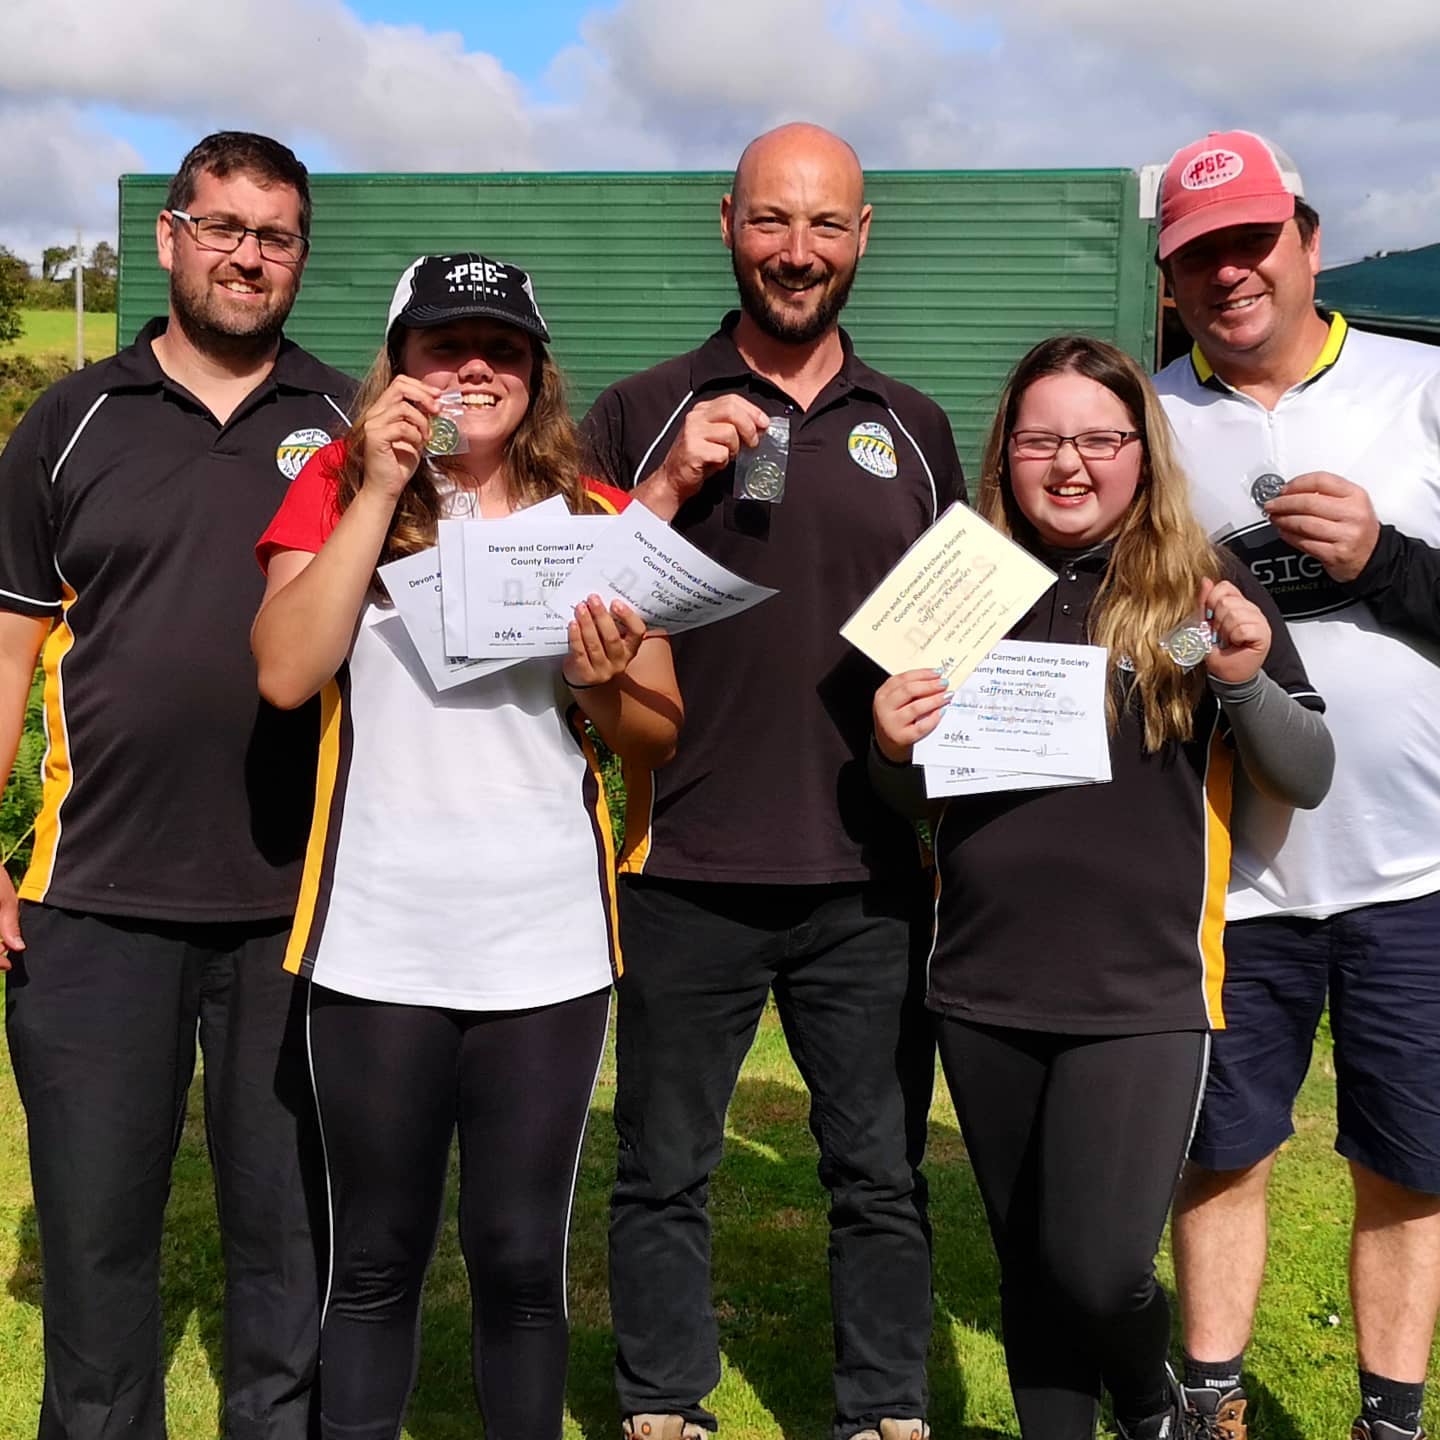 A great day for team B.O.W. at Redruth today! Saffron  took 1st place u12 recurve, Chloe took 1st place u14 compound, Andrew took 2nd place gents compound, Rob took 2nd place gents recurve and Lee took some raffle tickets that are going to win tomorrow! Well done everyone and good luck for tomorrow.